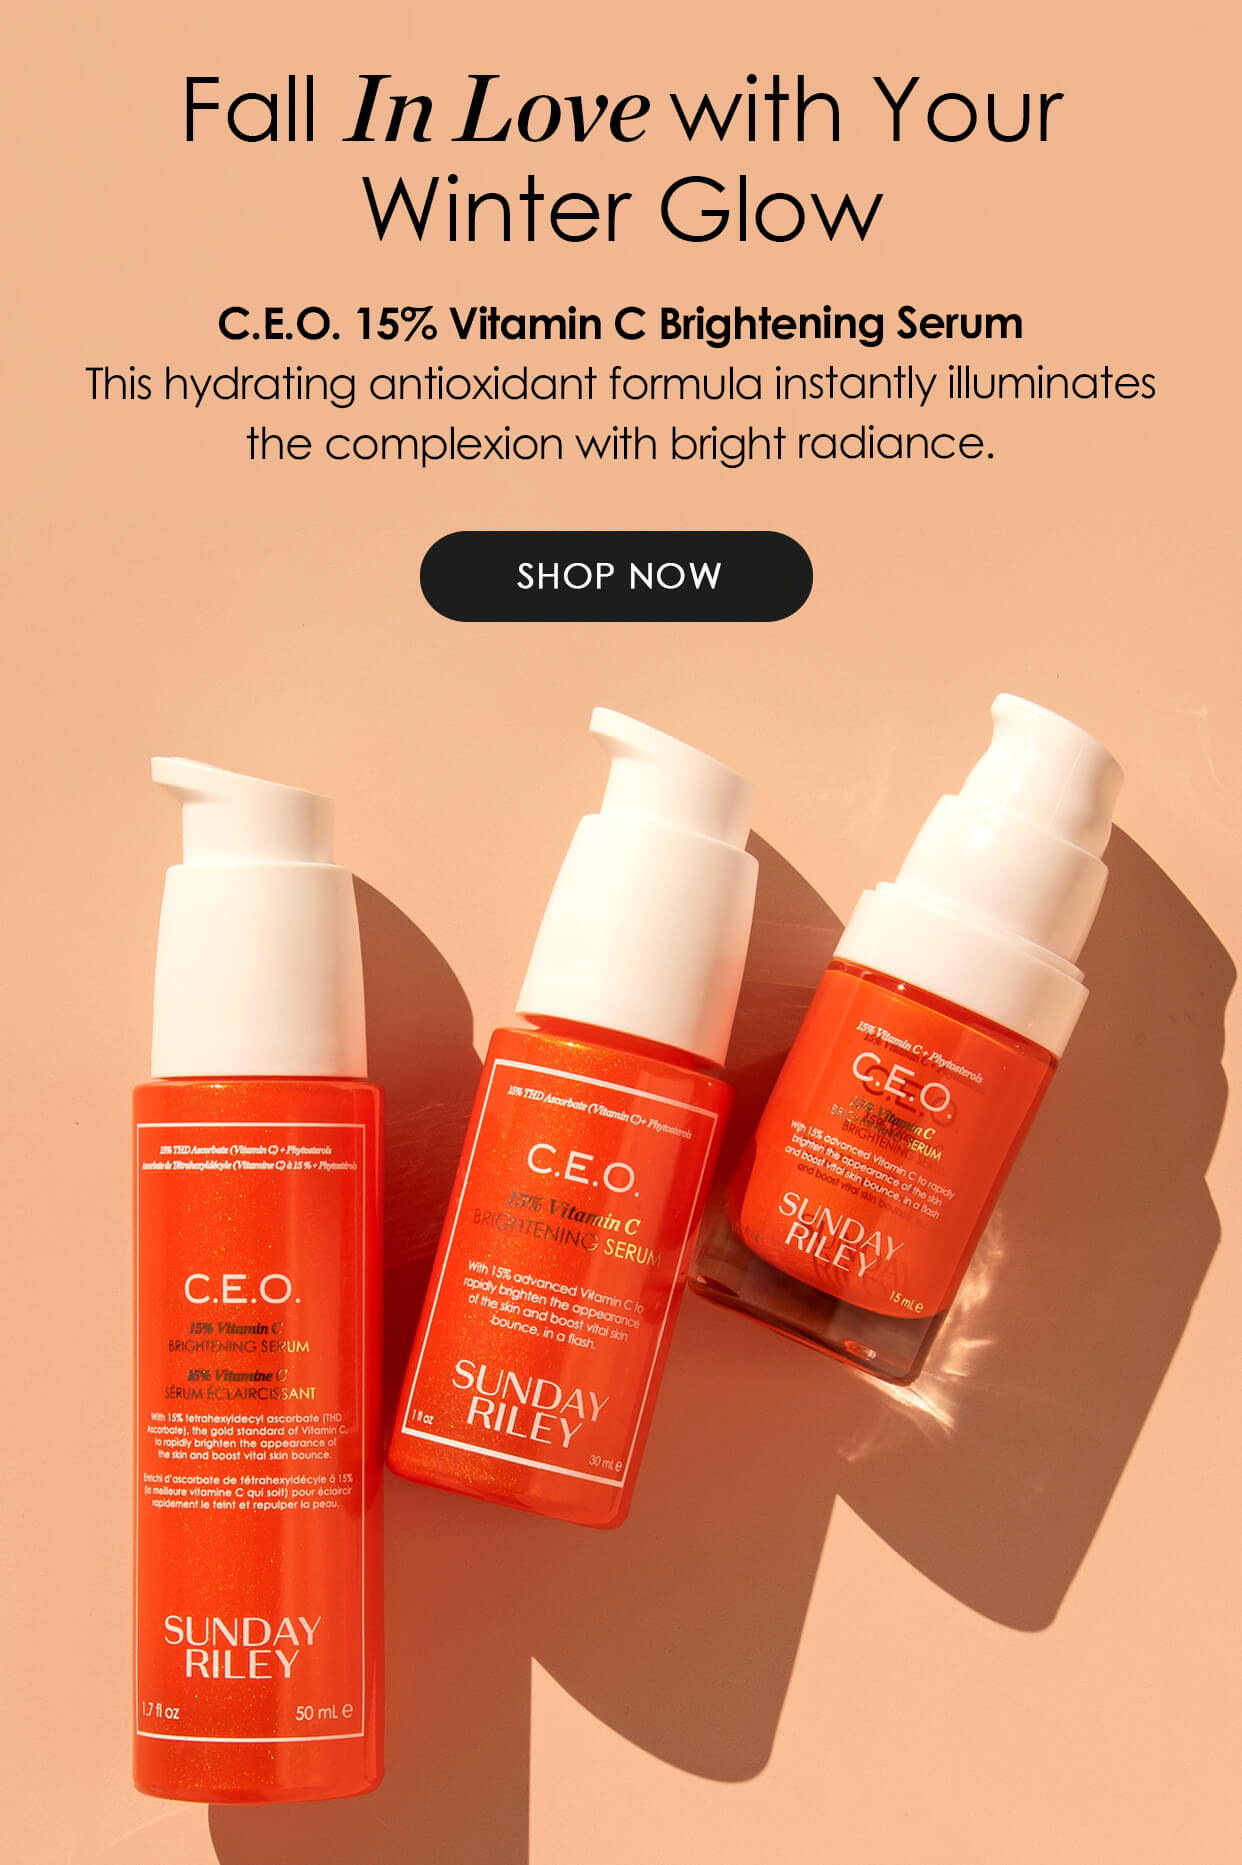 background with c.e.o. serum bottles on display - "Fall In Love with Your Winter Glow - C.E.O. 15% Vitamin C Brightening Serum: This hydrating antioxidant formula instantly illuminates the complexion with bright radiance."